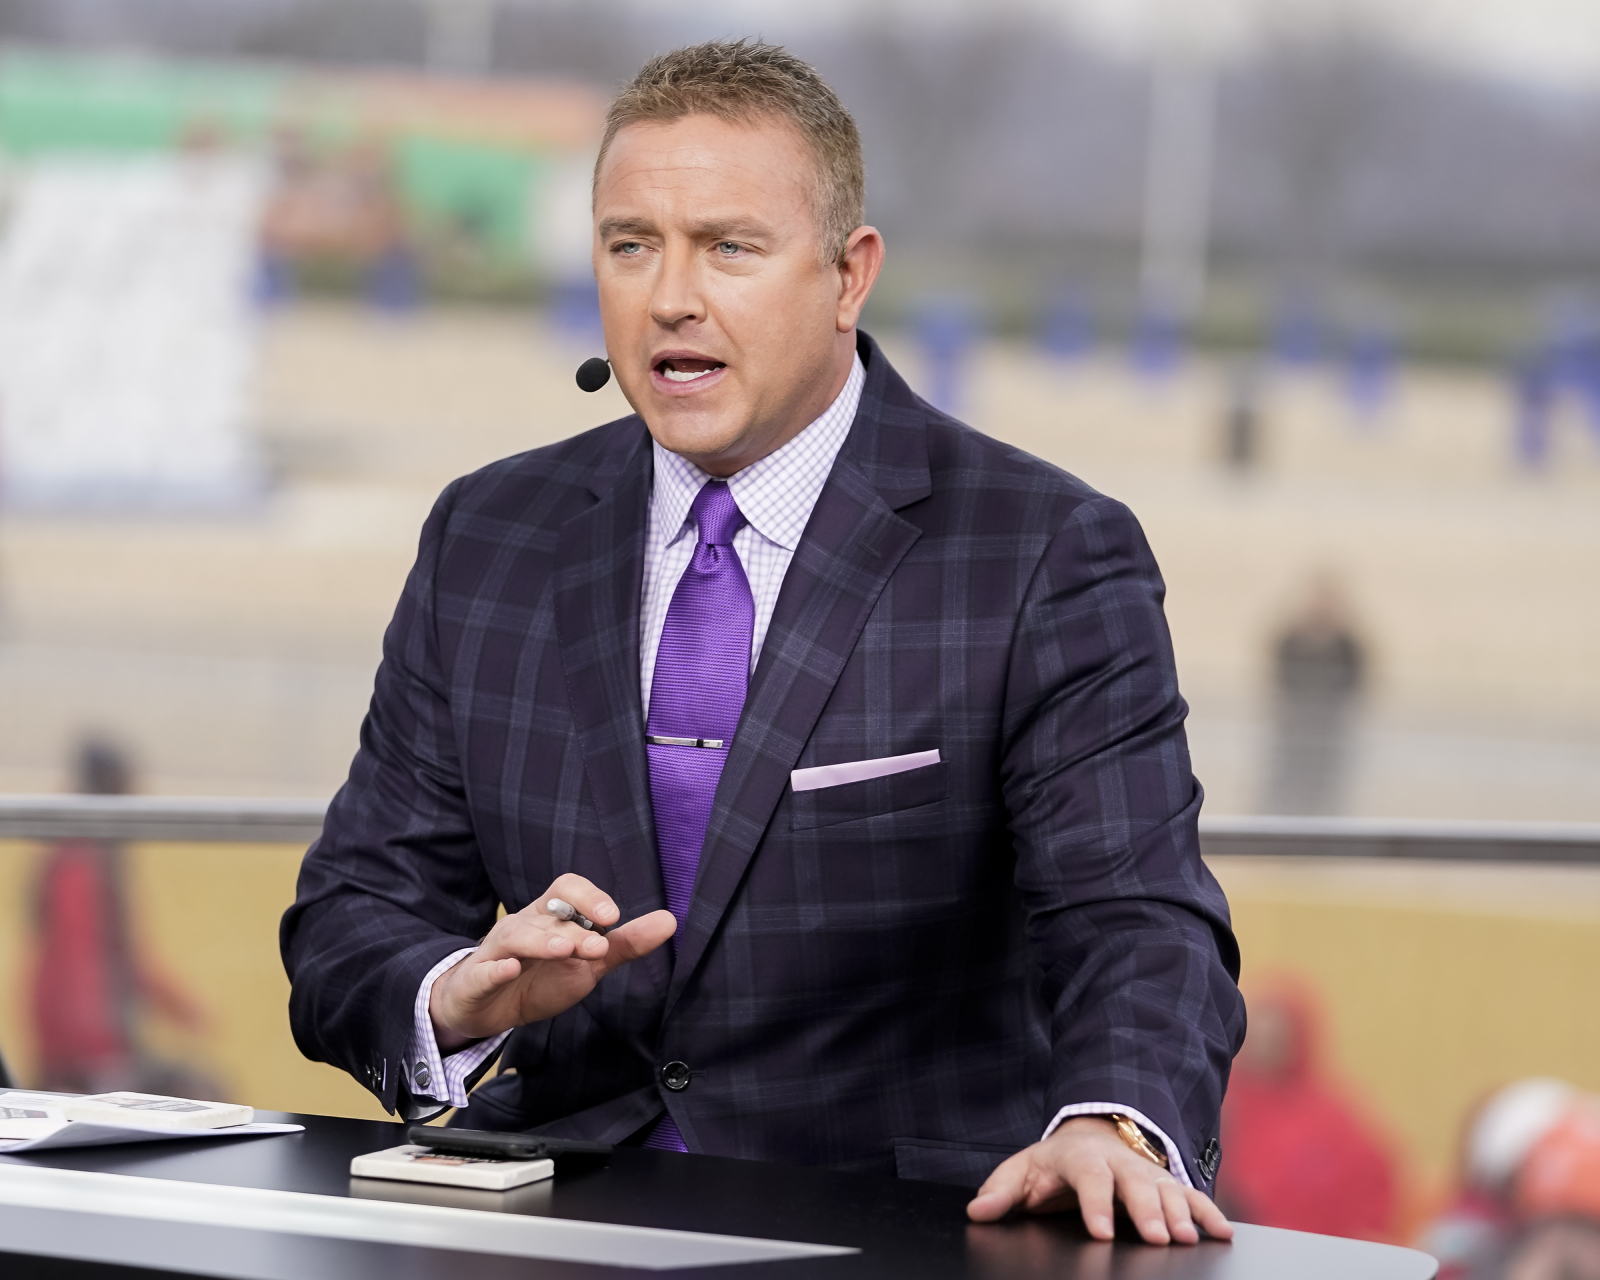 Kirk Herbstreit is one of the most well-respected announcers in sports. Recently, he made interesting comments about his future at ESPN.